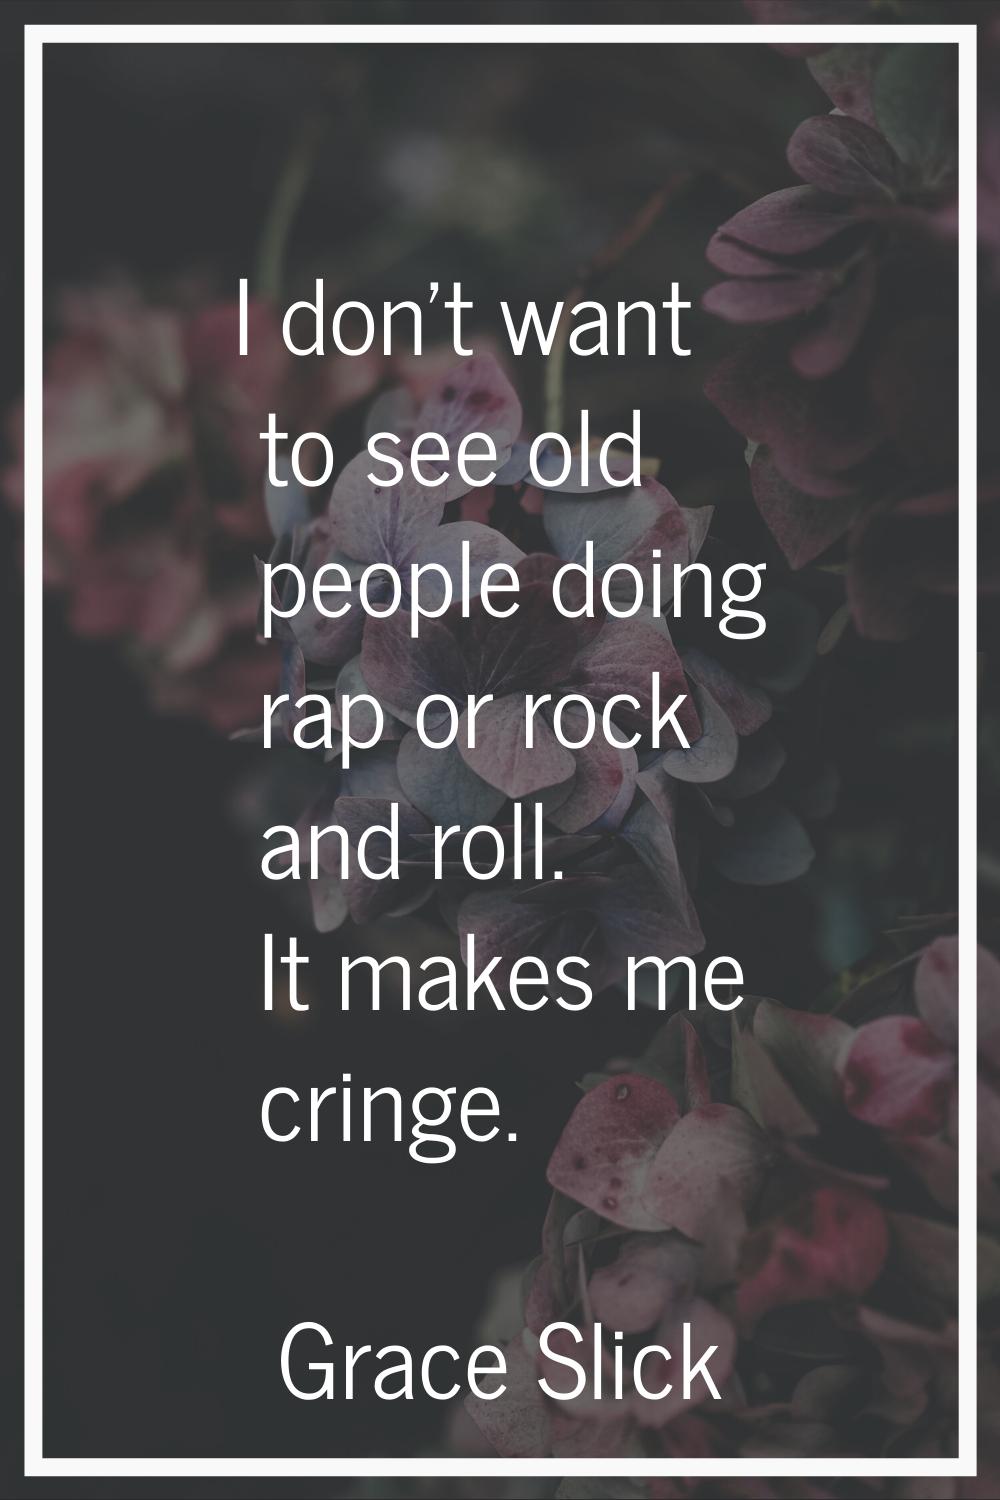 I don't want to see old people doing rap or rock and roll. It makes me cringe.